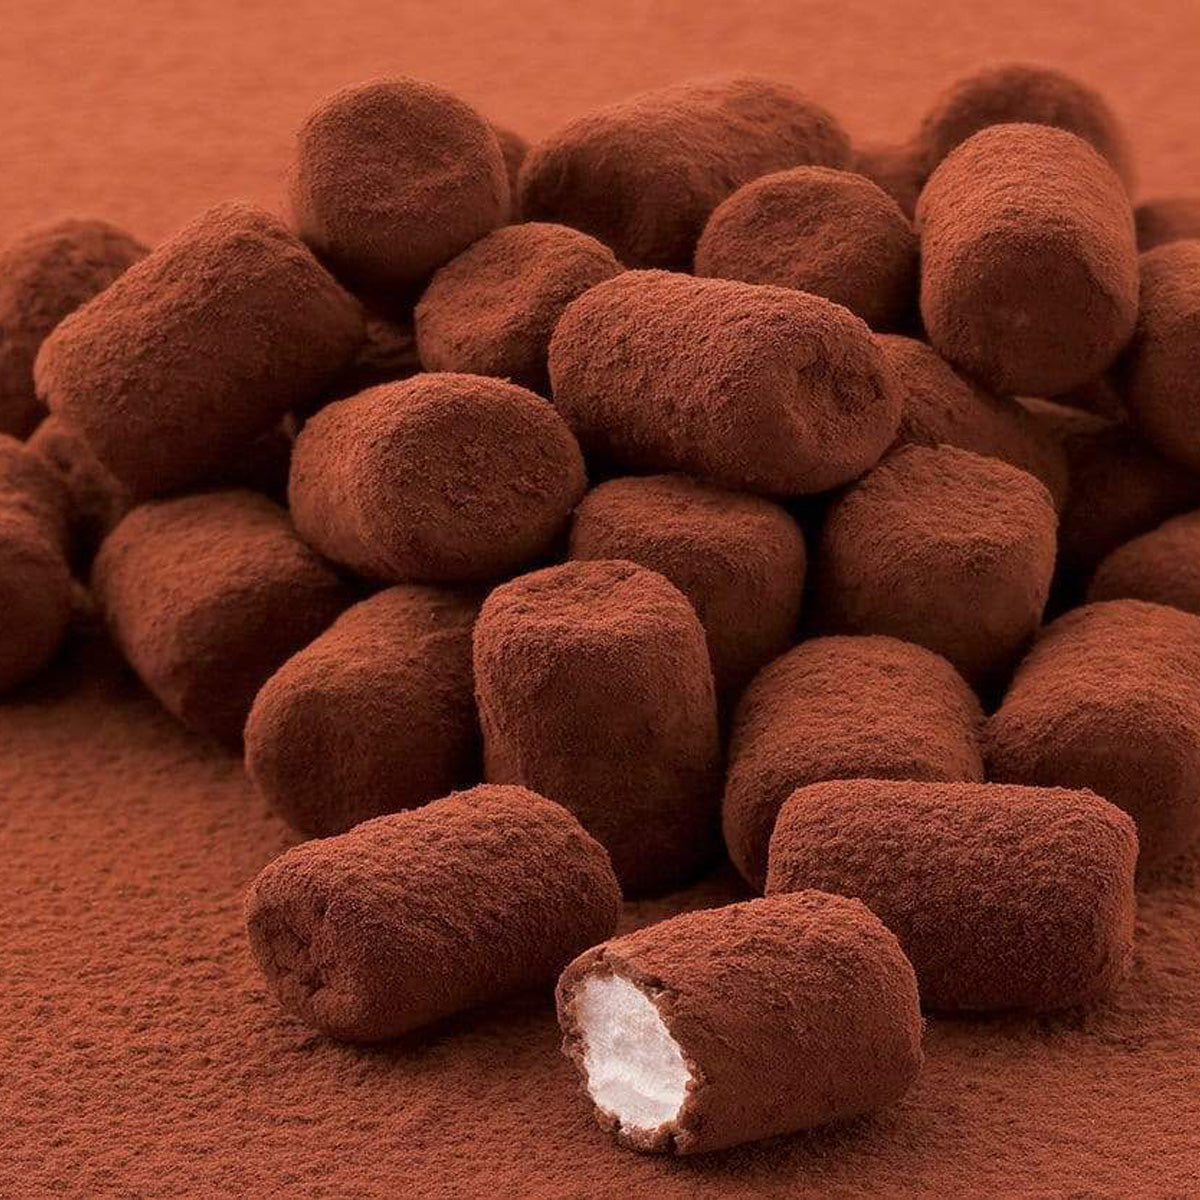 ROYCE' Chocolate - Marshmallow Chocolate "Milk Coffee" - Image shows brown chocolate-coated marshmallows on a brown surface.